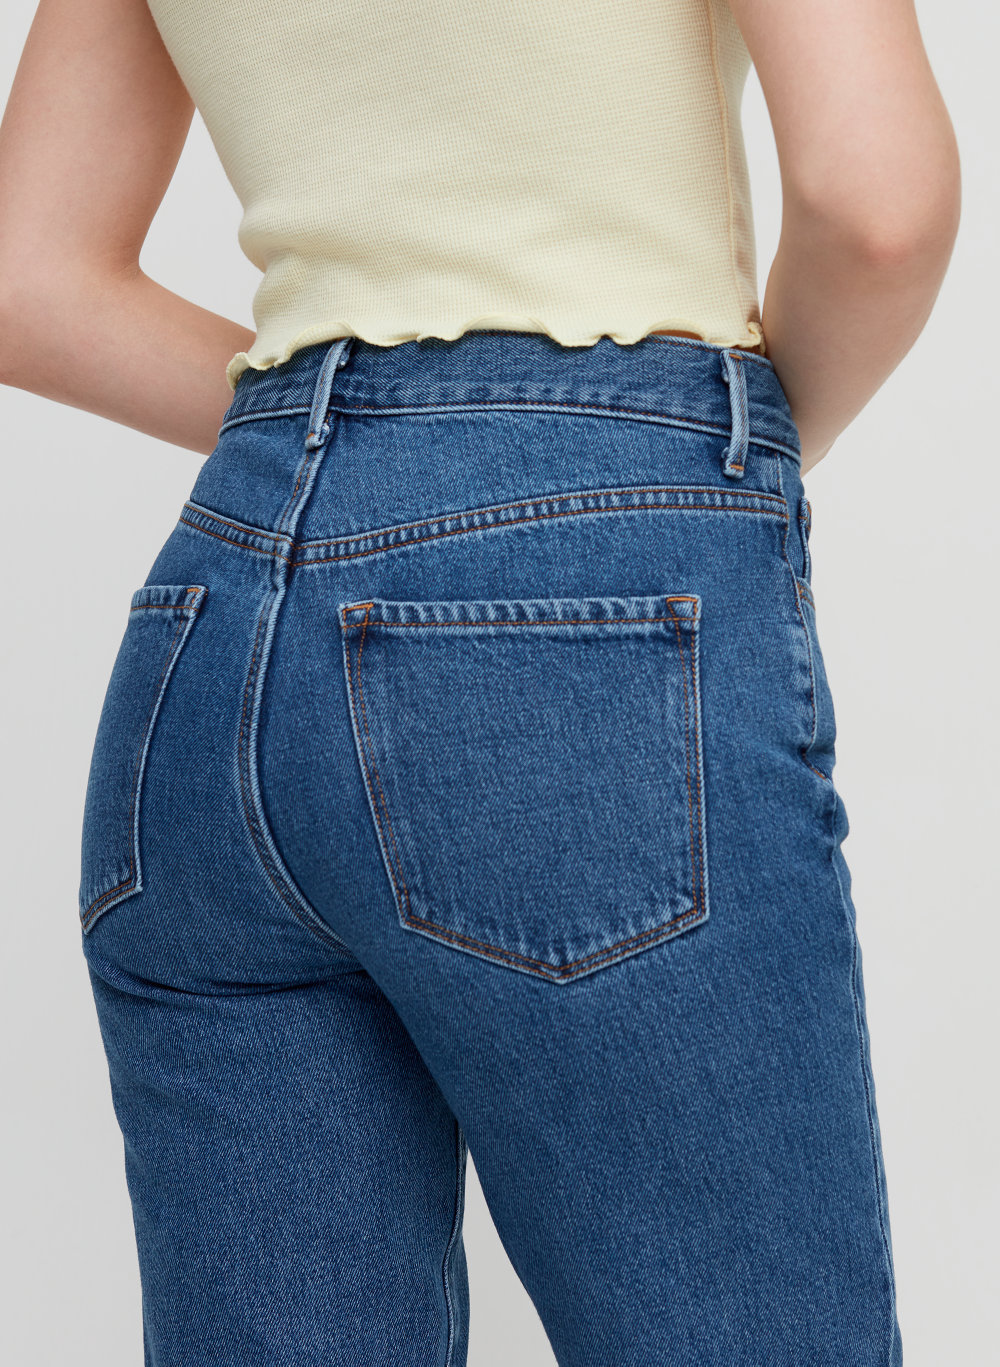 best mom jeans 2018